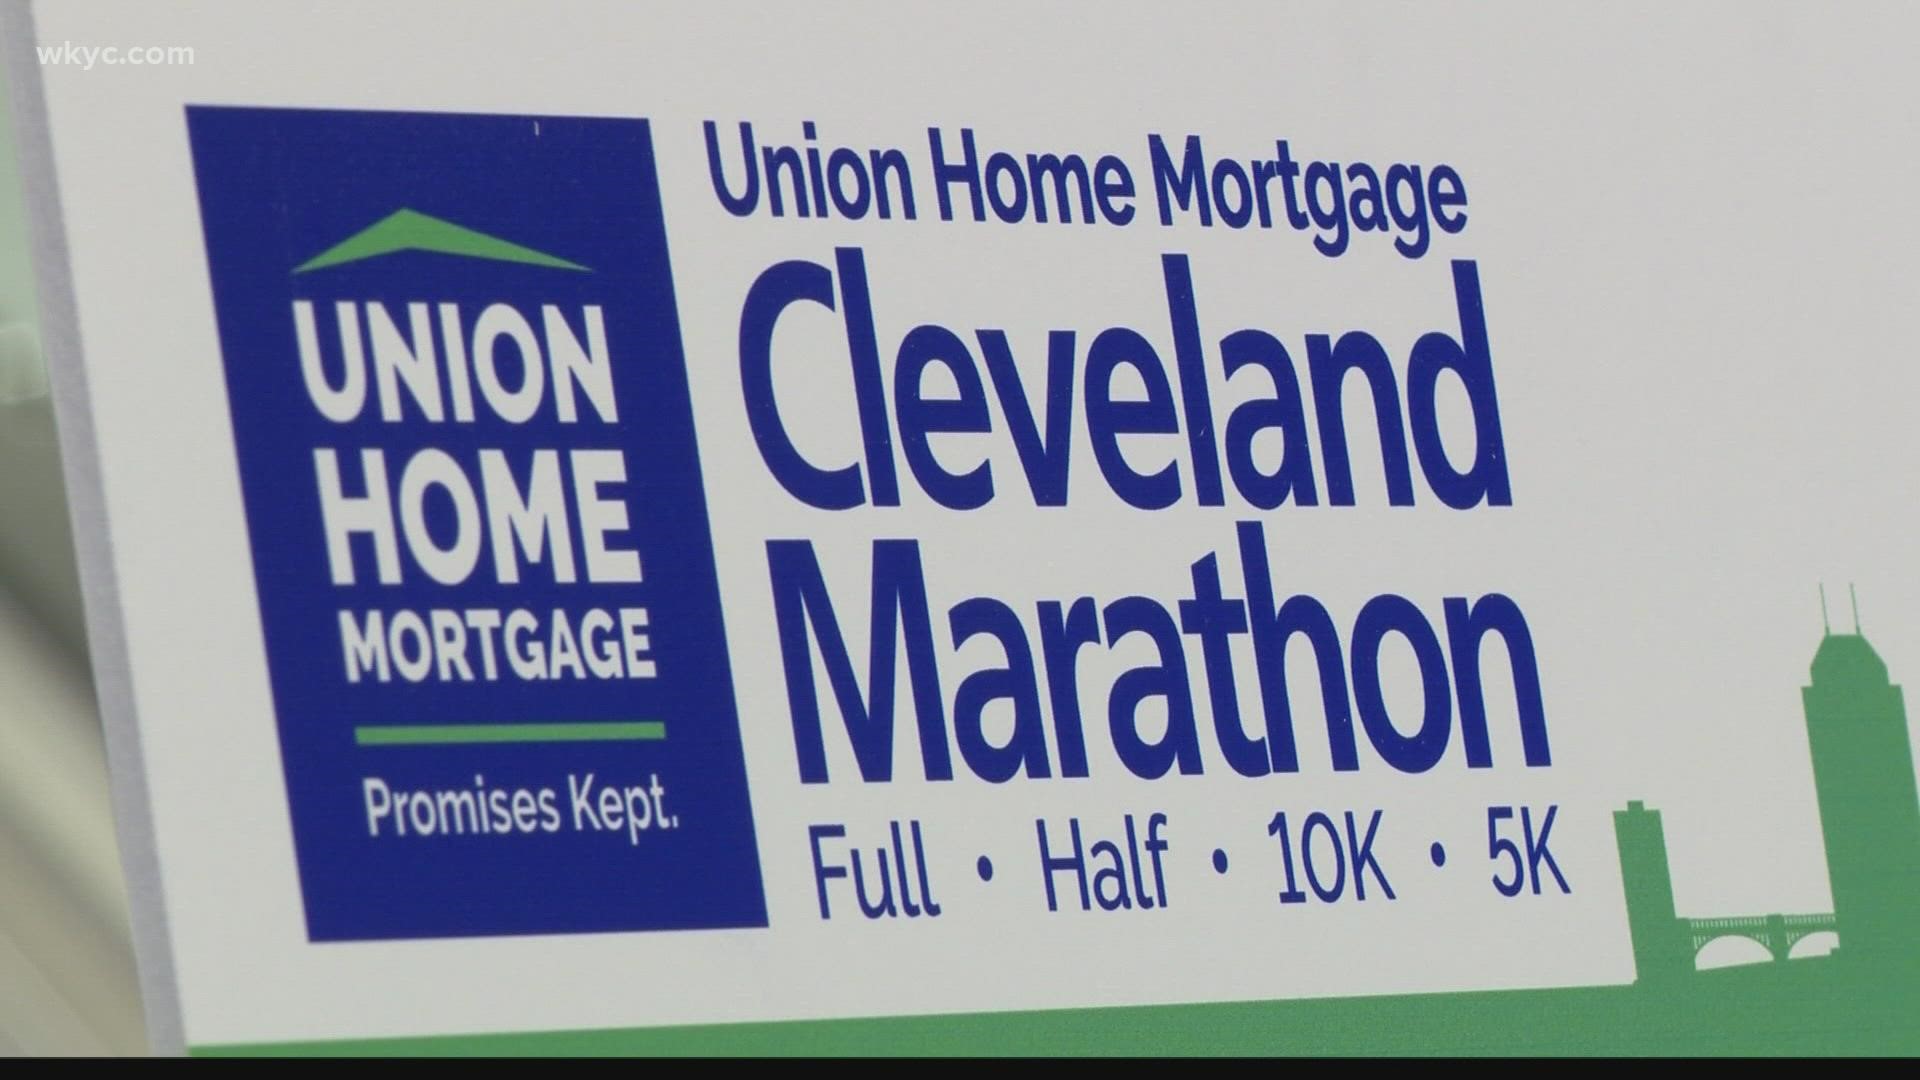 The Cleveland Marathon Returns, What Events Are Planned.